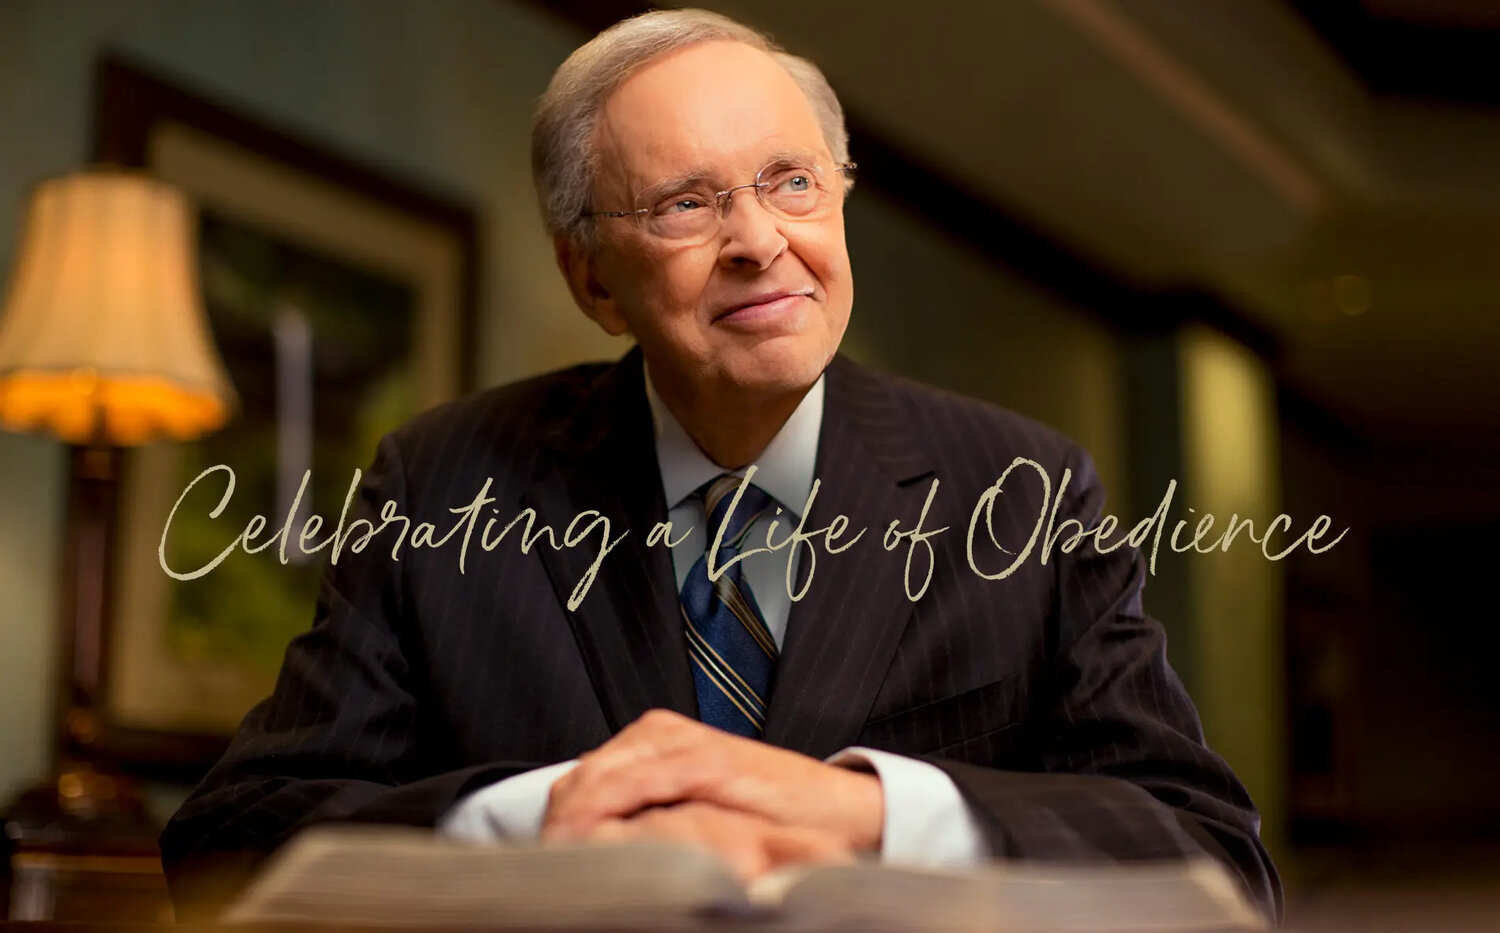 Dr. Charles Stanley in a photo accompanying his obituary on the First Baptist Atlanta website. (Photo/First Baptist Atlanta)